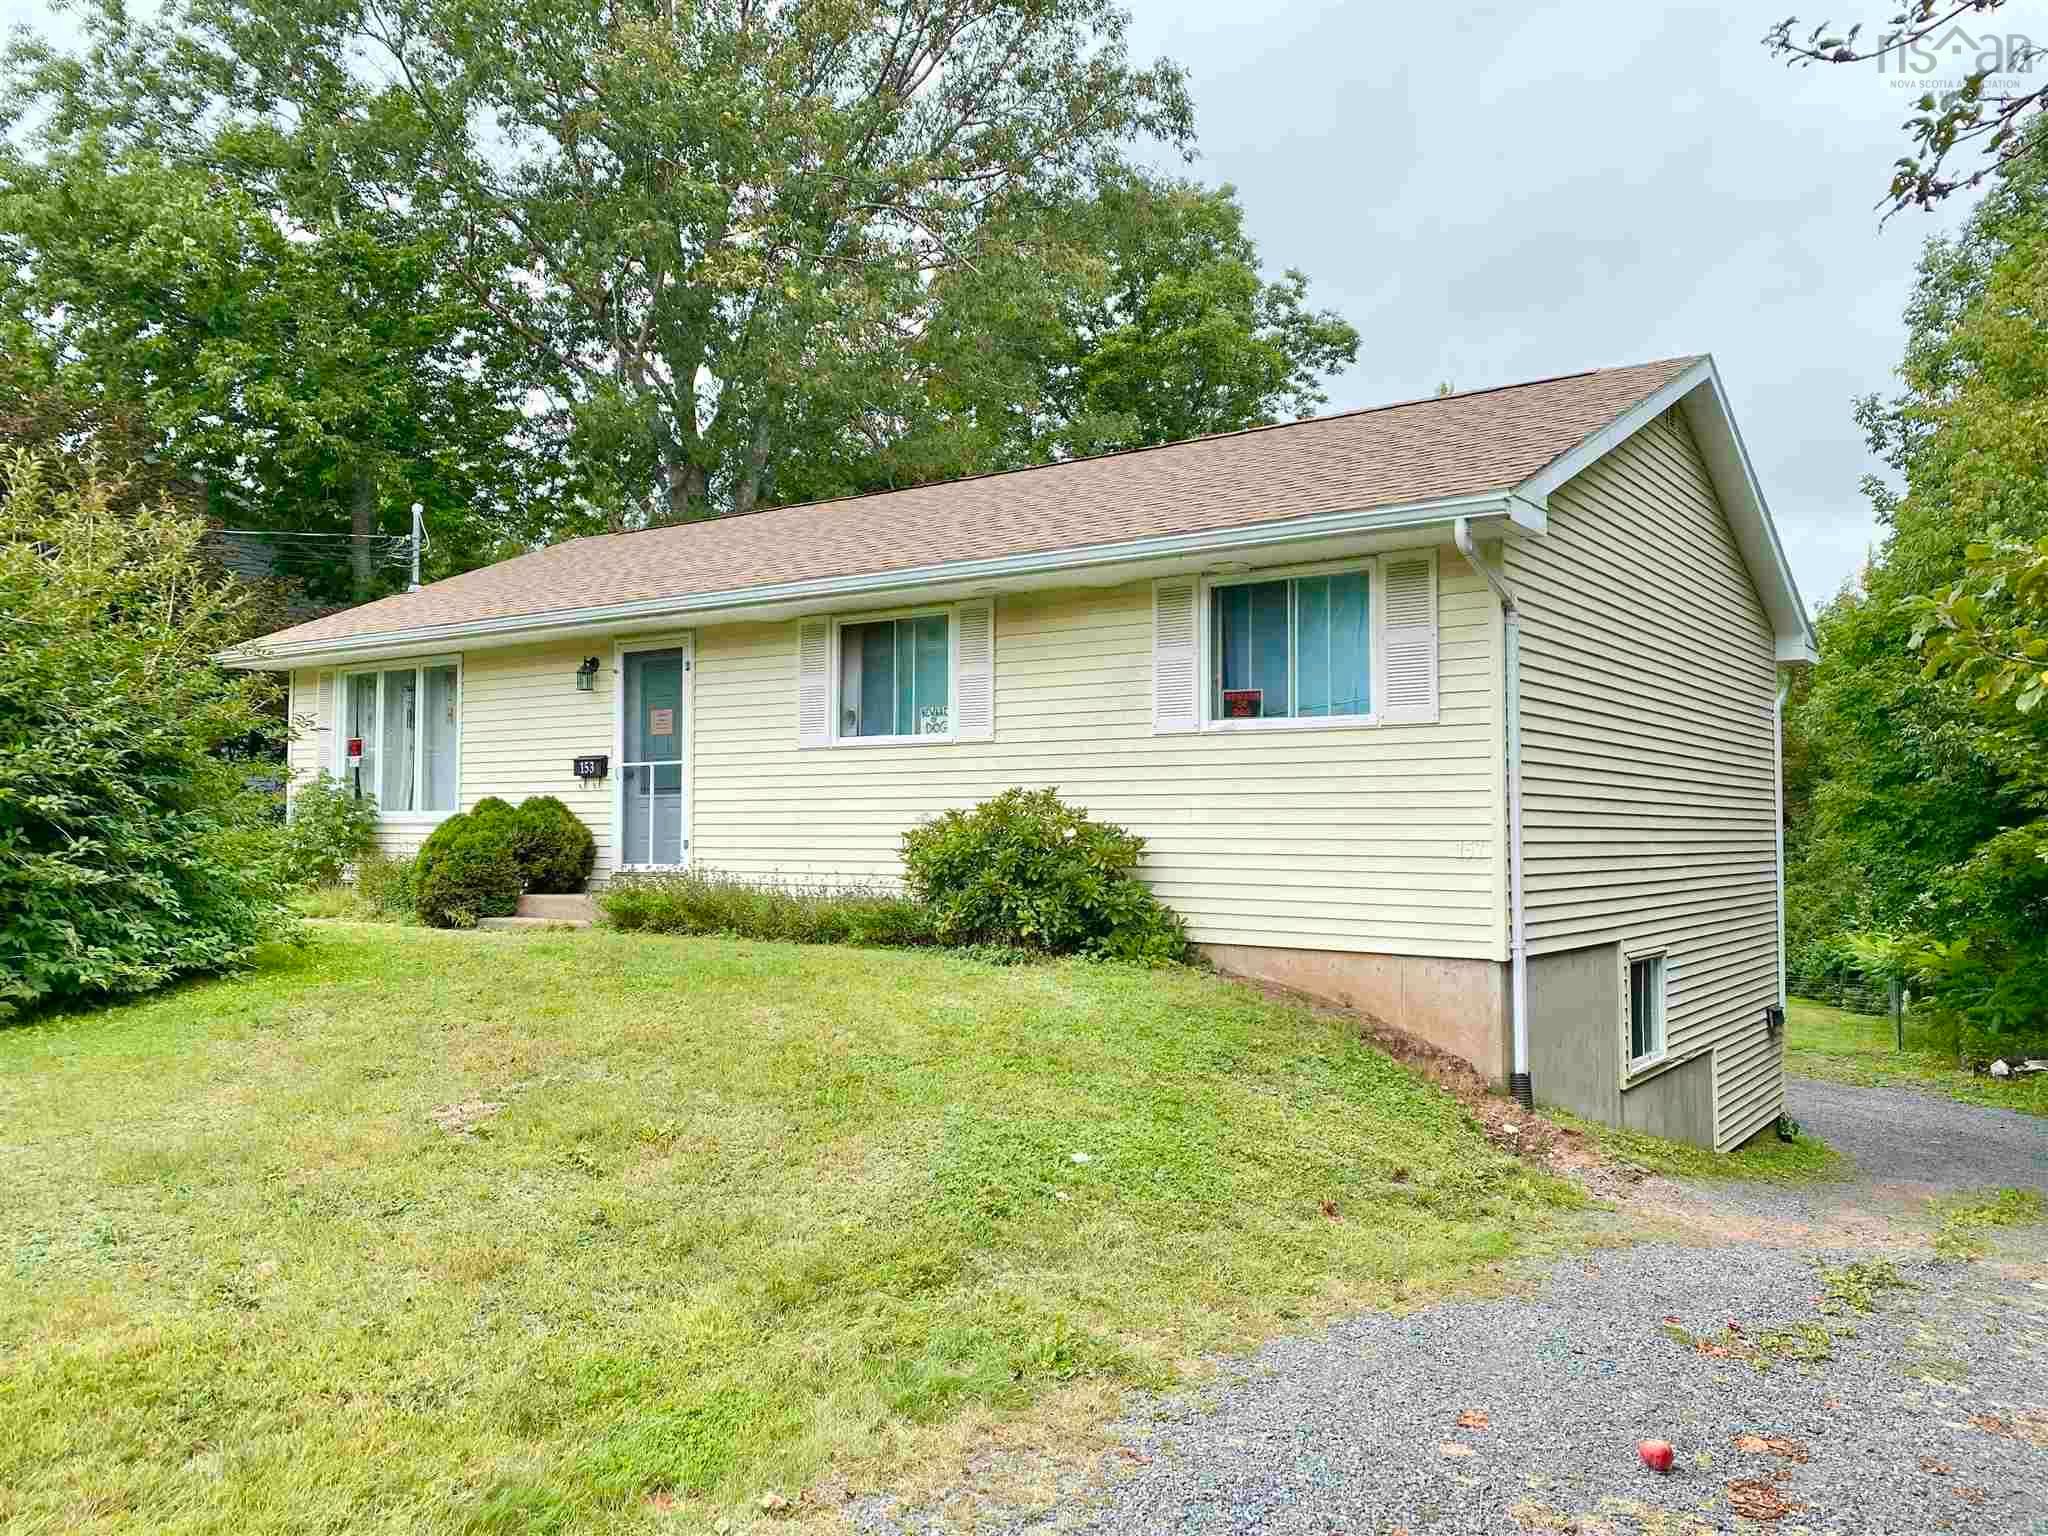 Main Photo: 153 Prospect Avenue in Kentville: 404-Kings County Multi-Family for sale (Annapolis Valley)  : MLS®# 202123229